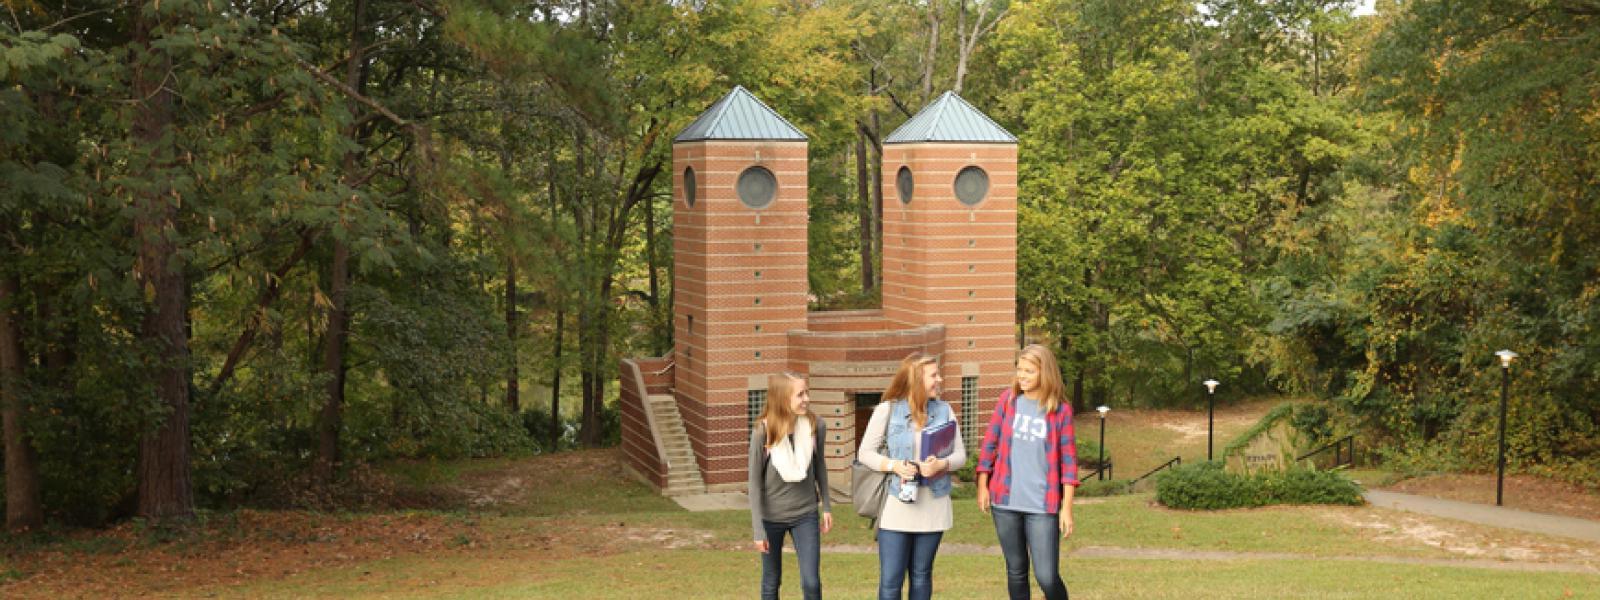 CIU students in front of the prayer towers.